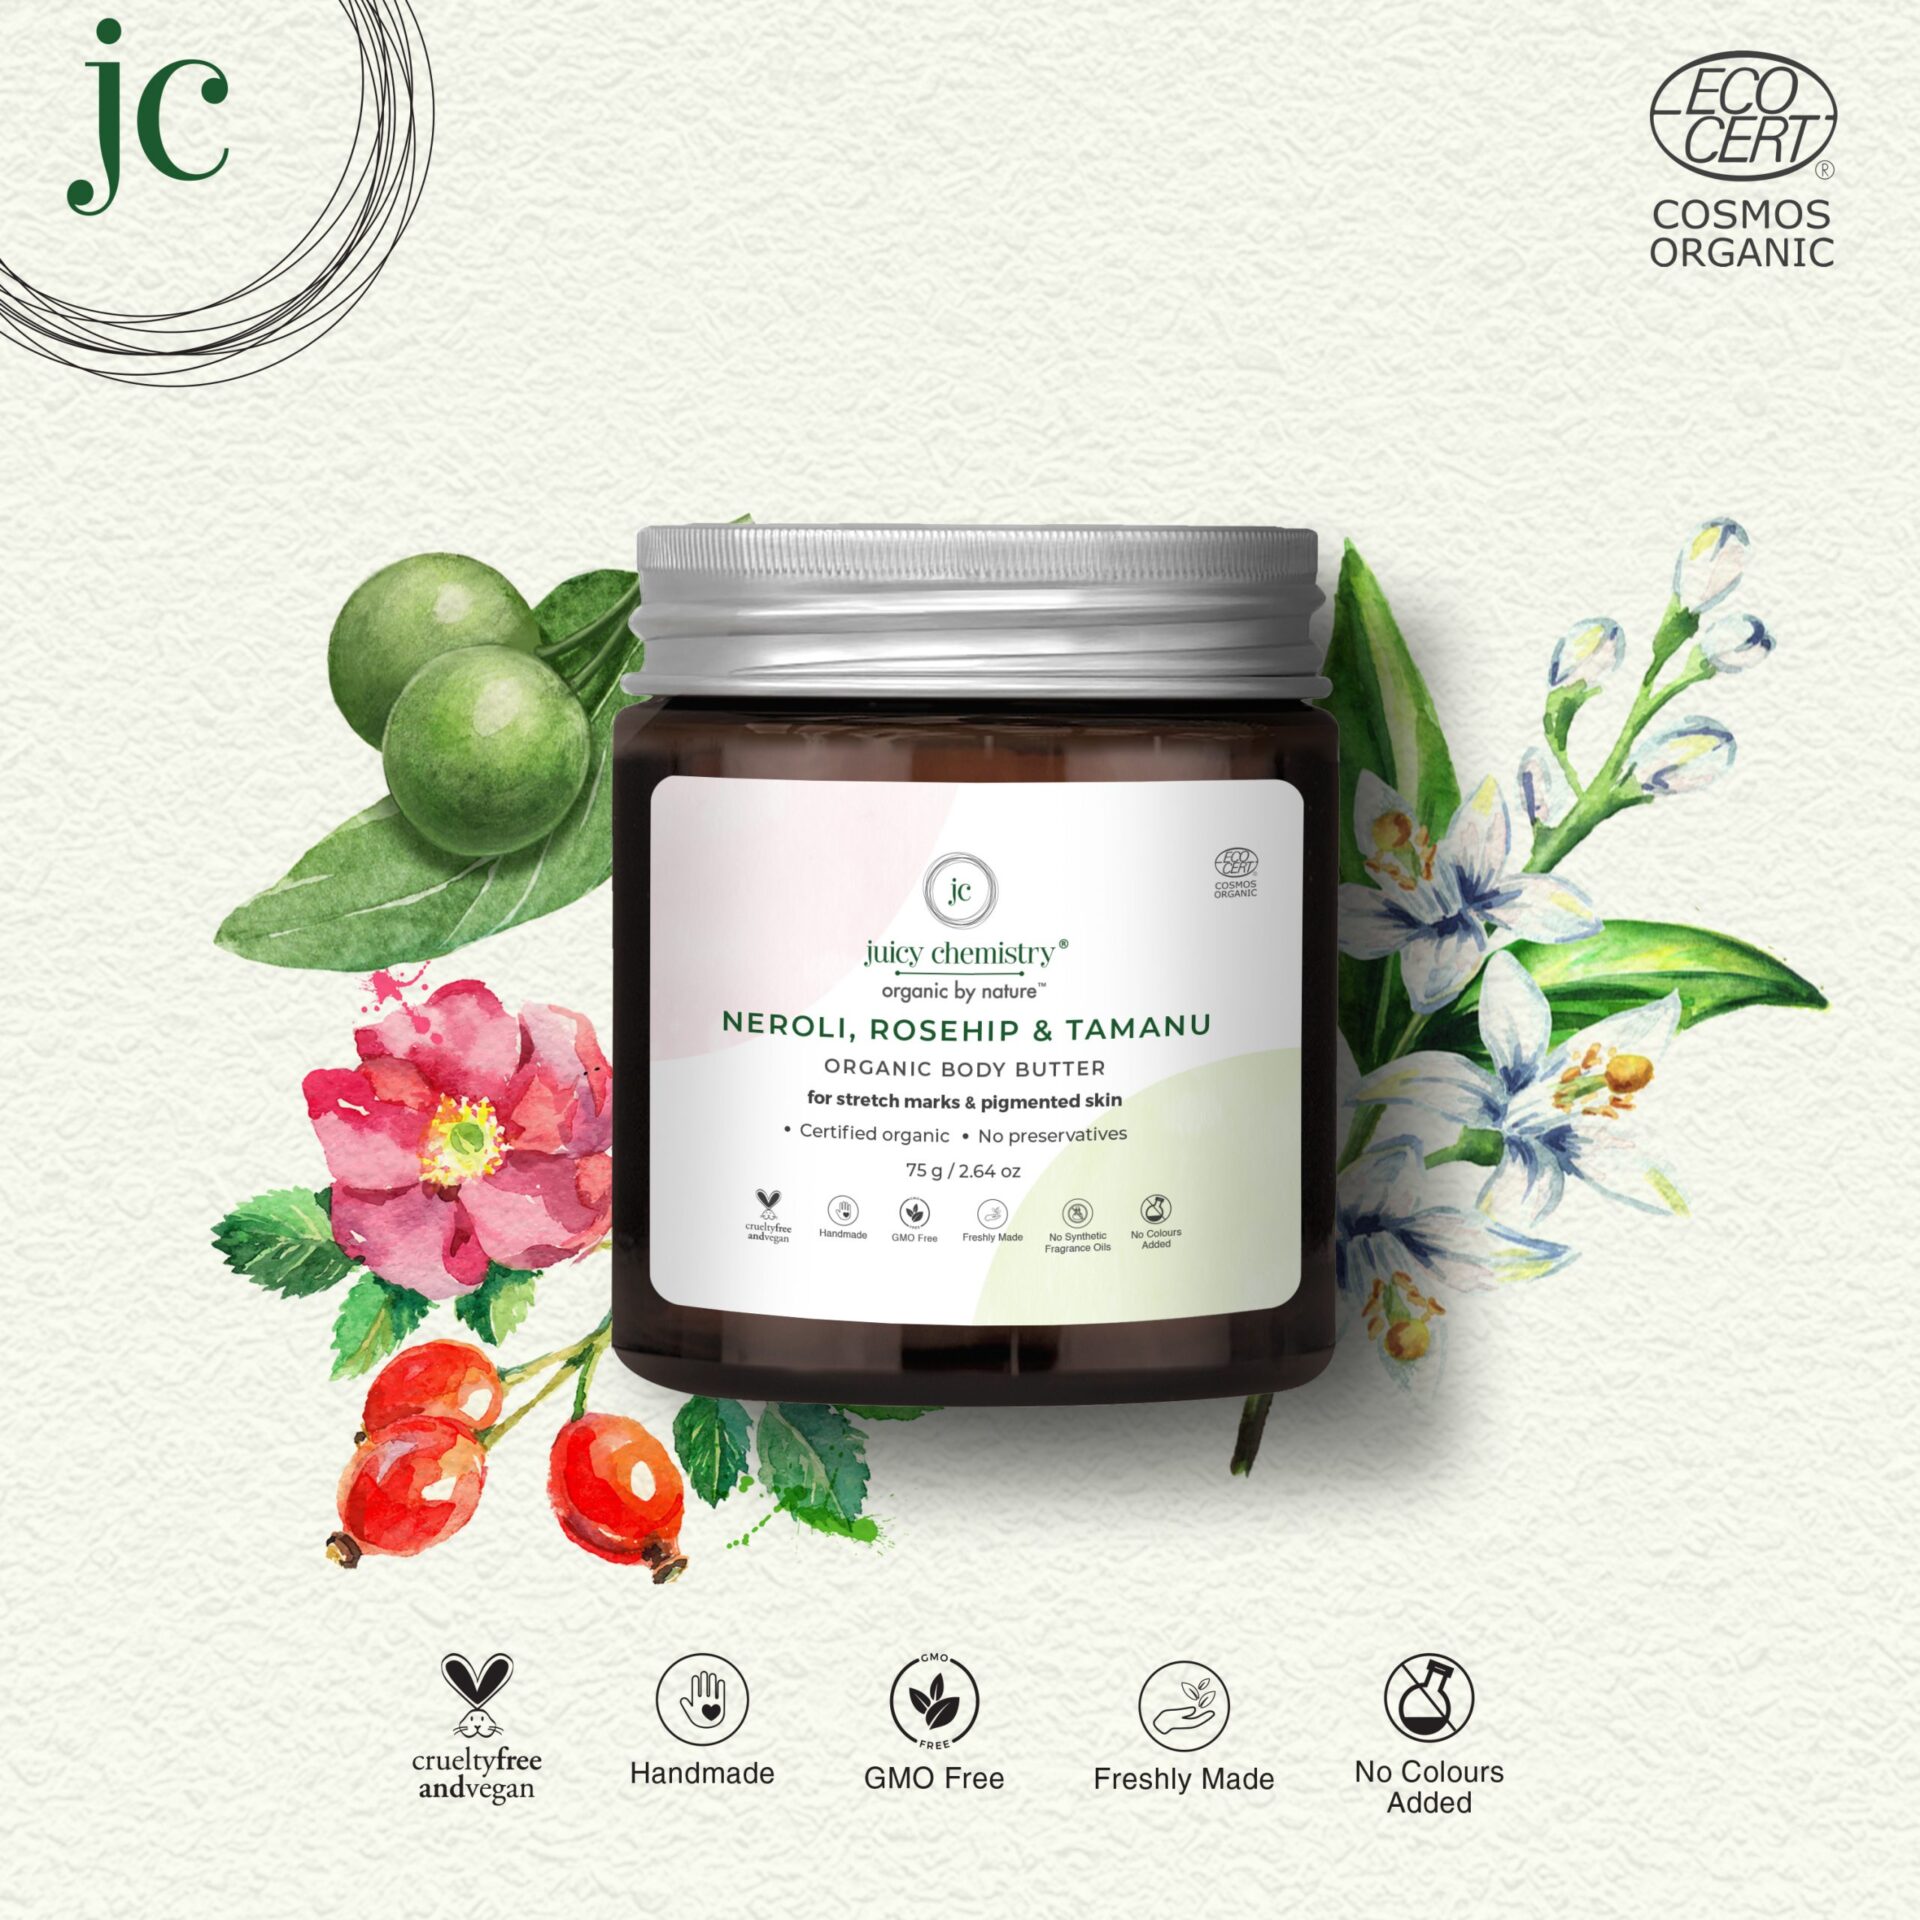 Juicy Chemistry Body Butter for Stretch Marks & Pigmented Skin with Neroli, Rosehip & Tamanu - 75 gm